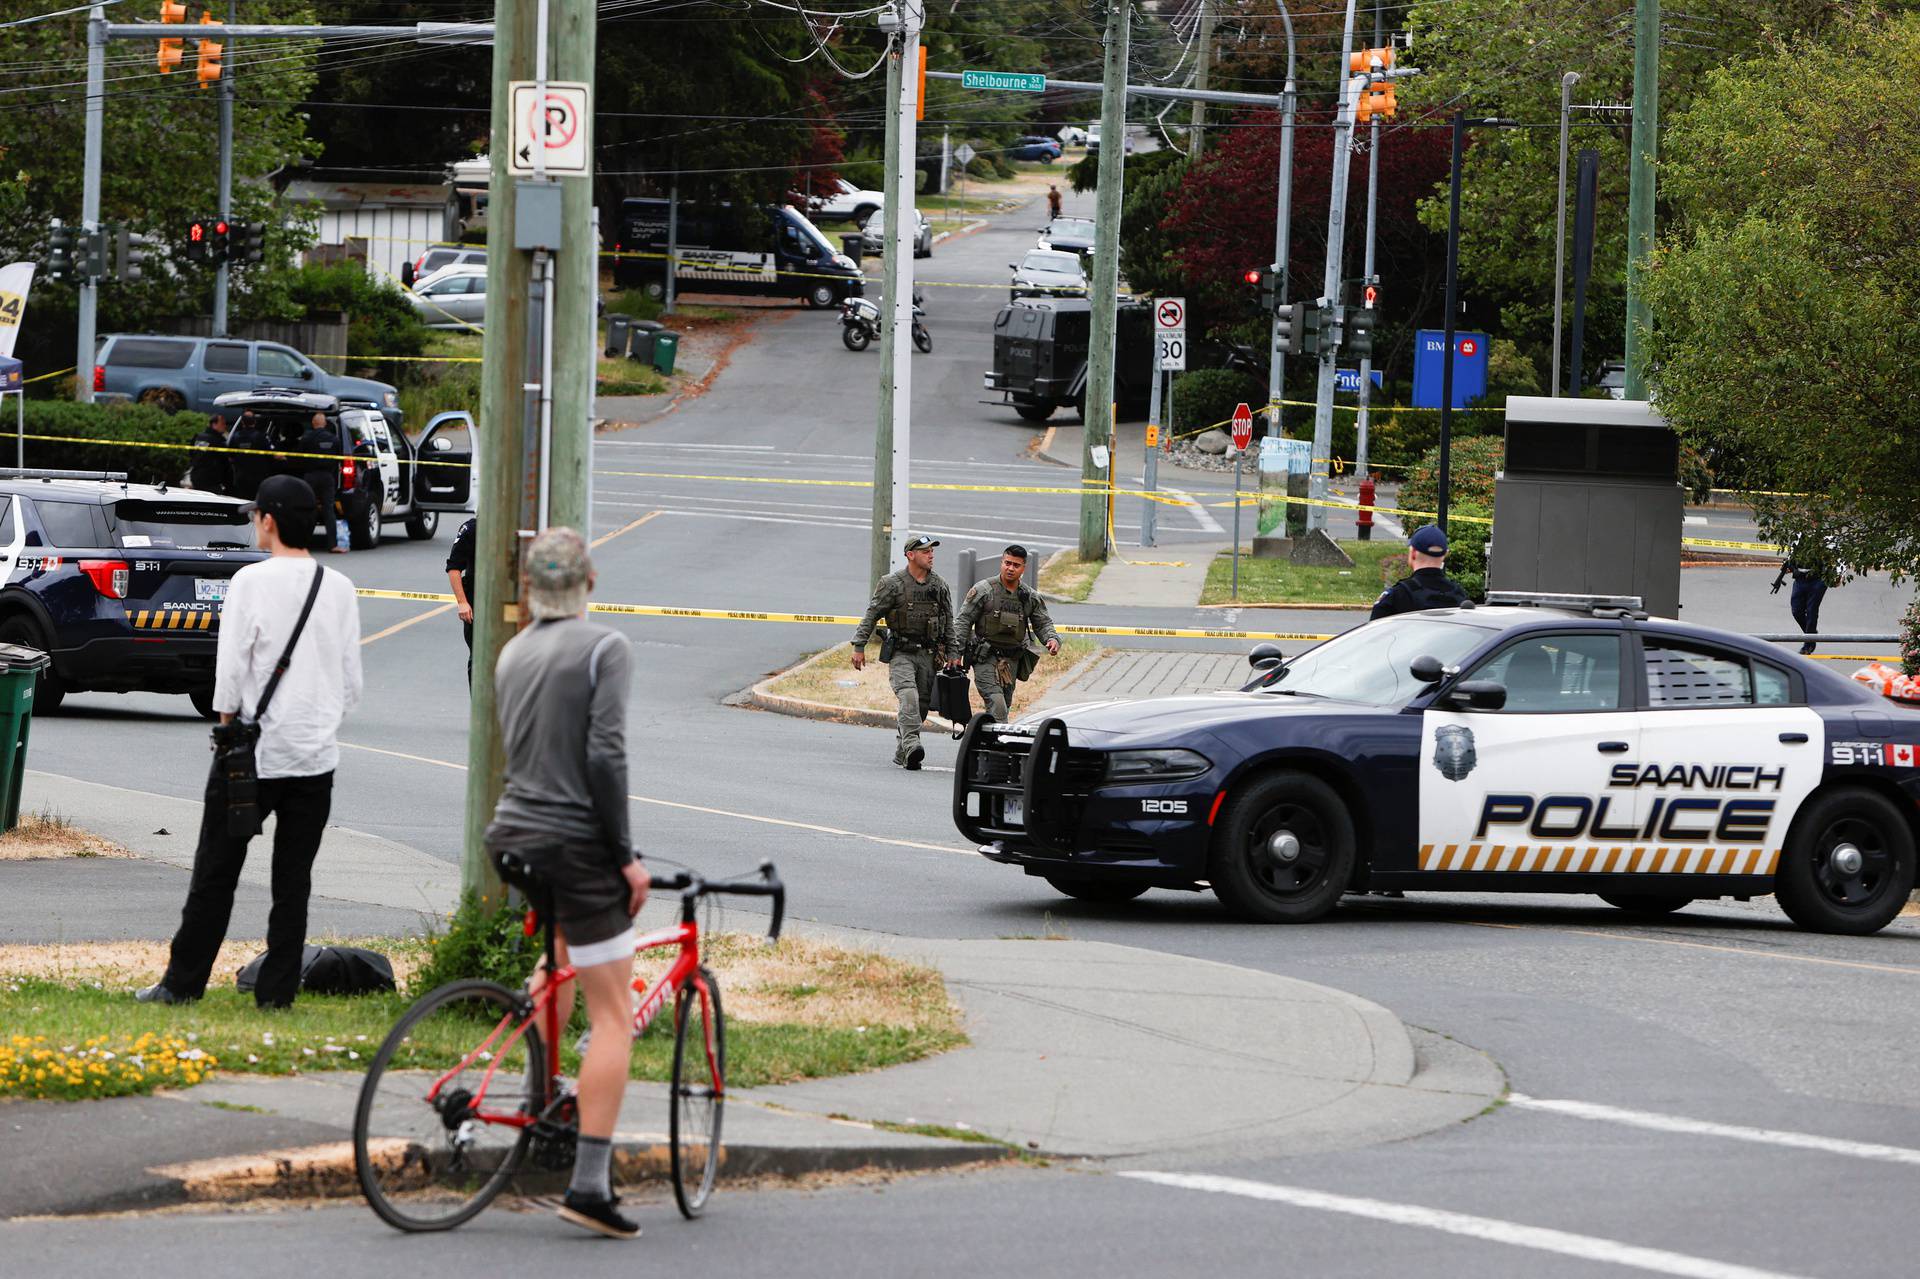 Police officers gather after two armed men entering a bank were killed in a shootout with the police in Saanich